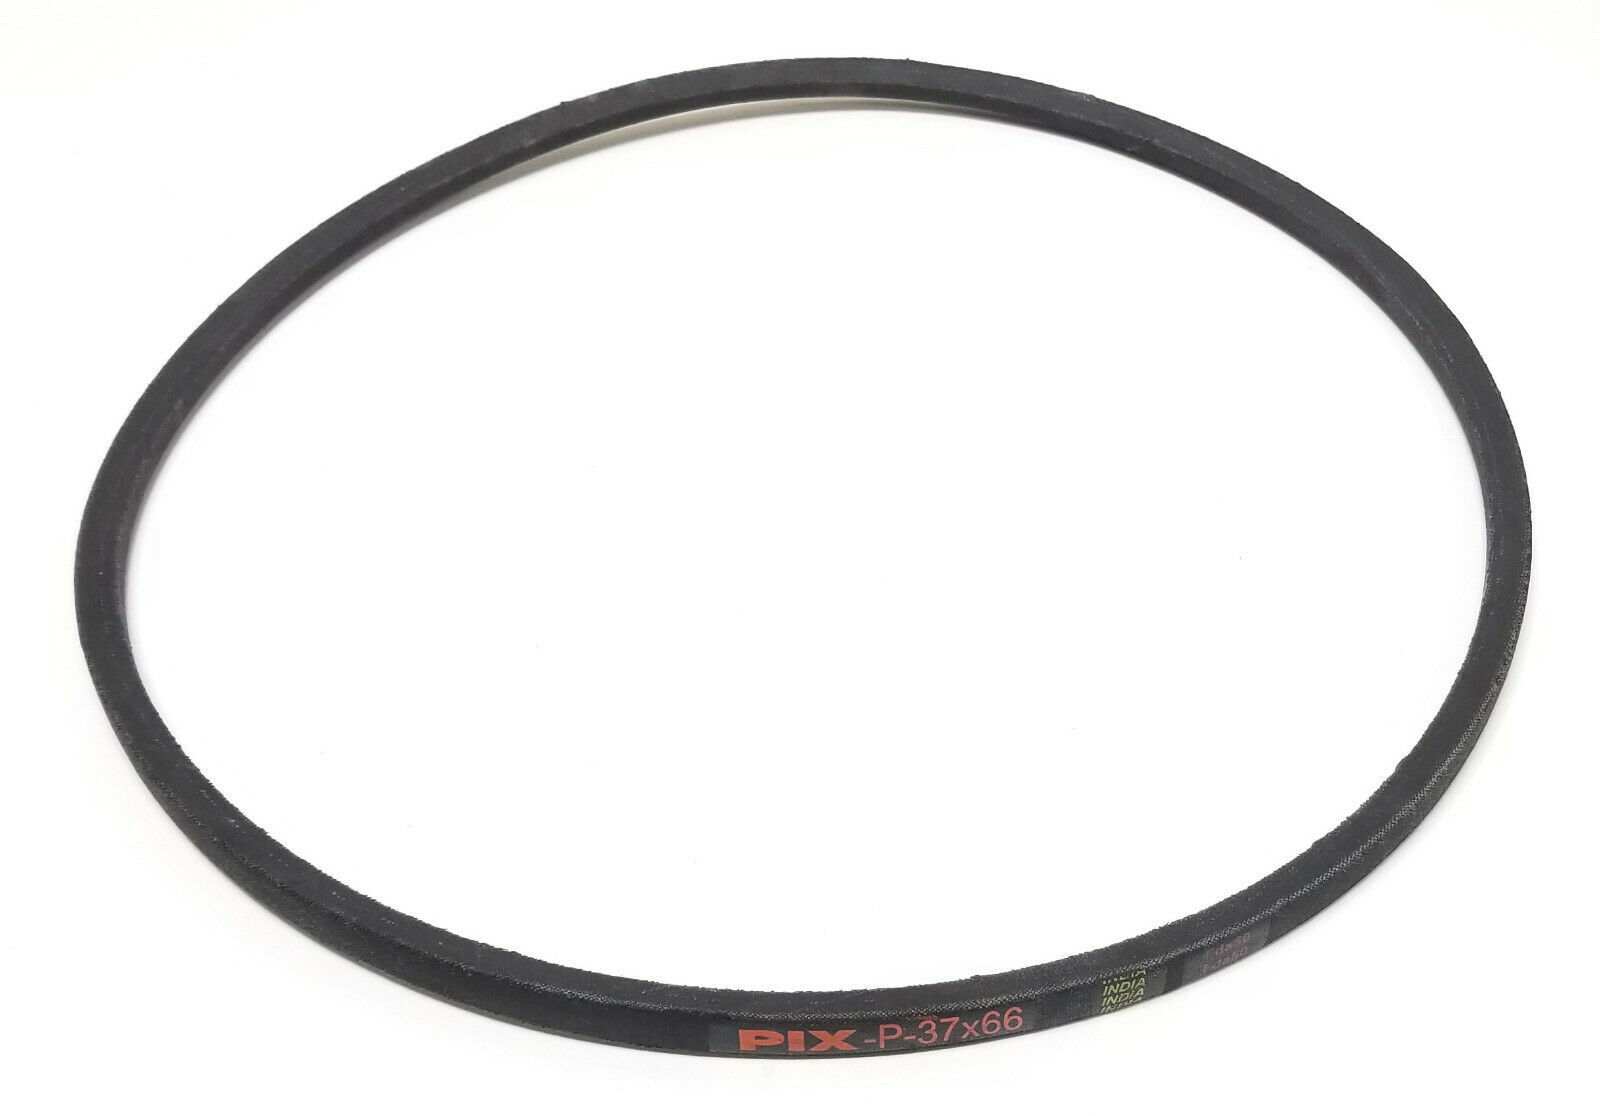 Replacement Belt for 037X66MA Murray 1/2" x 3/32" - $11.95